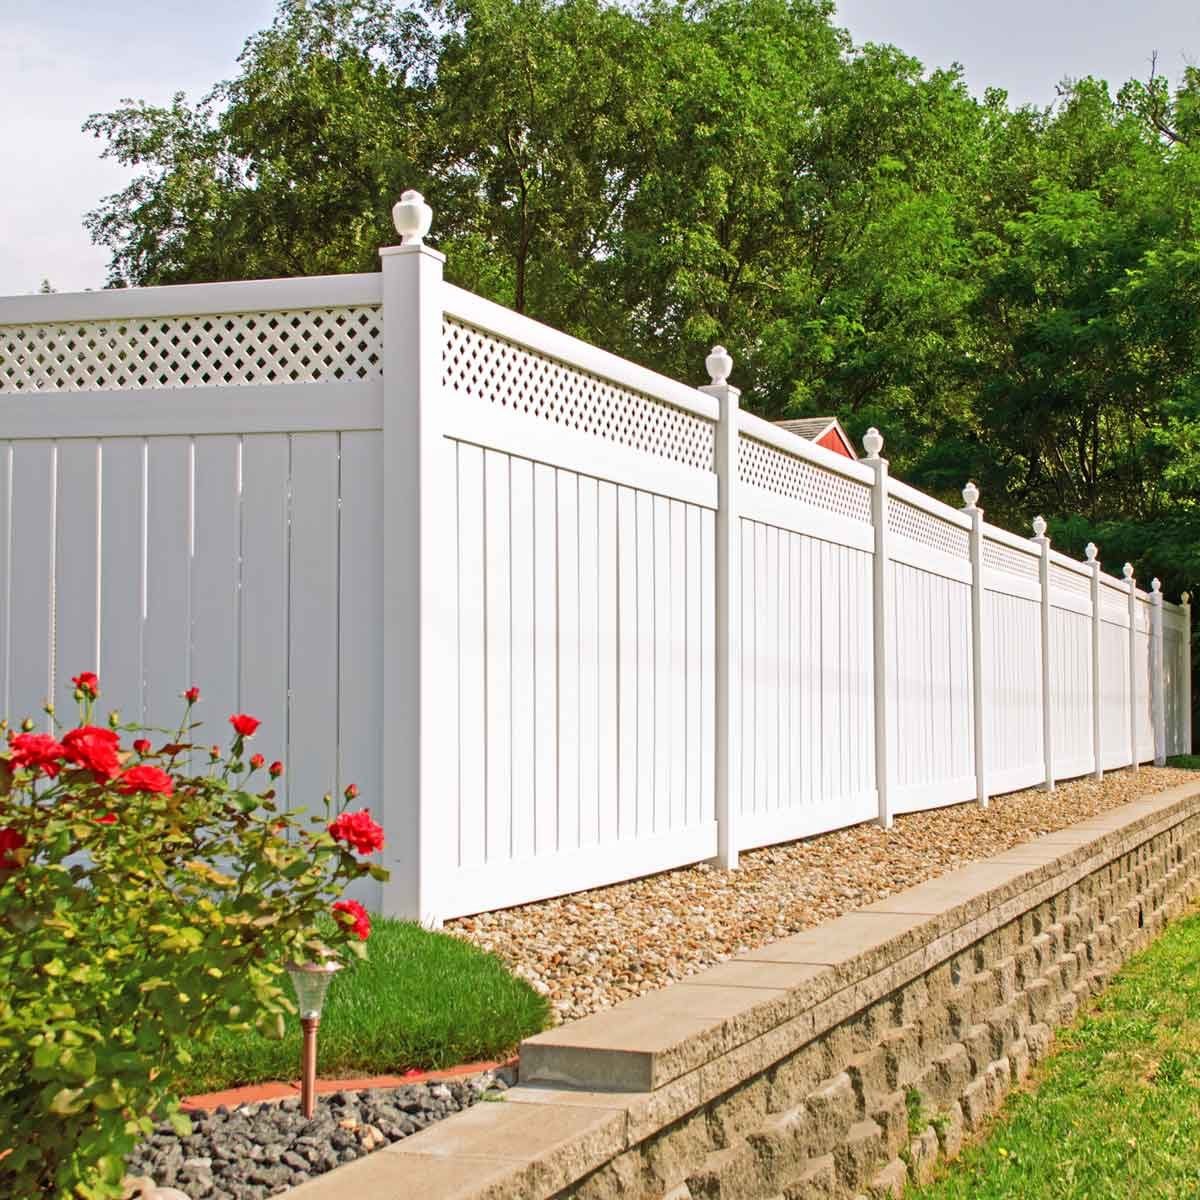 What to Consider Before Fencing in a Yard